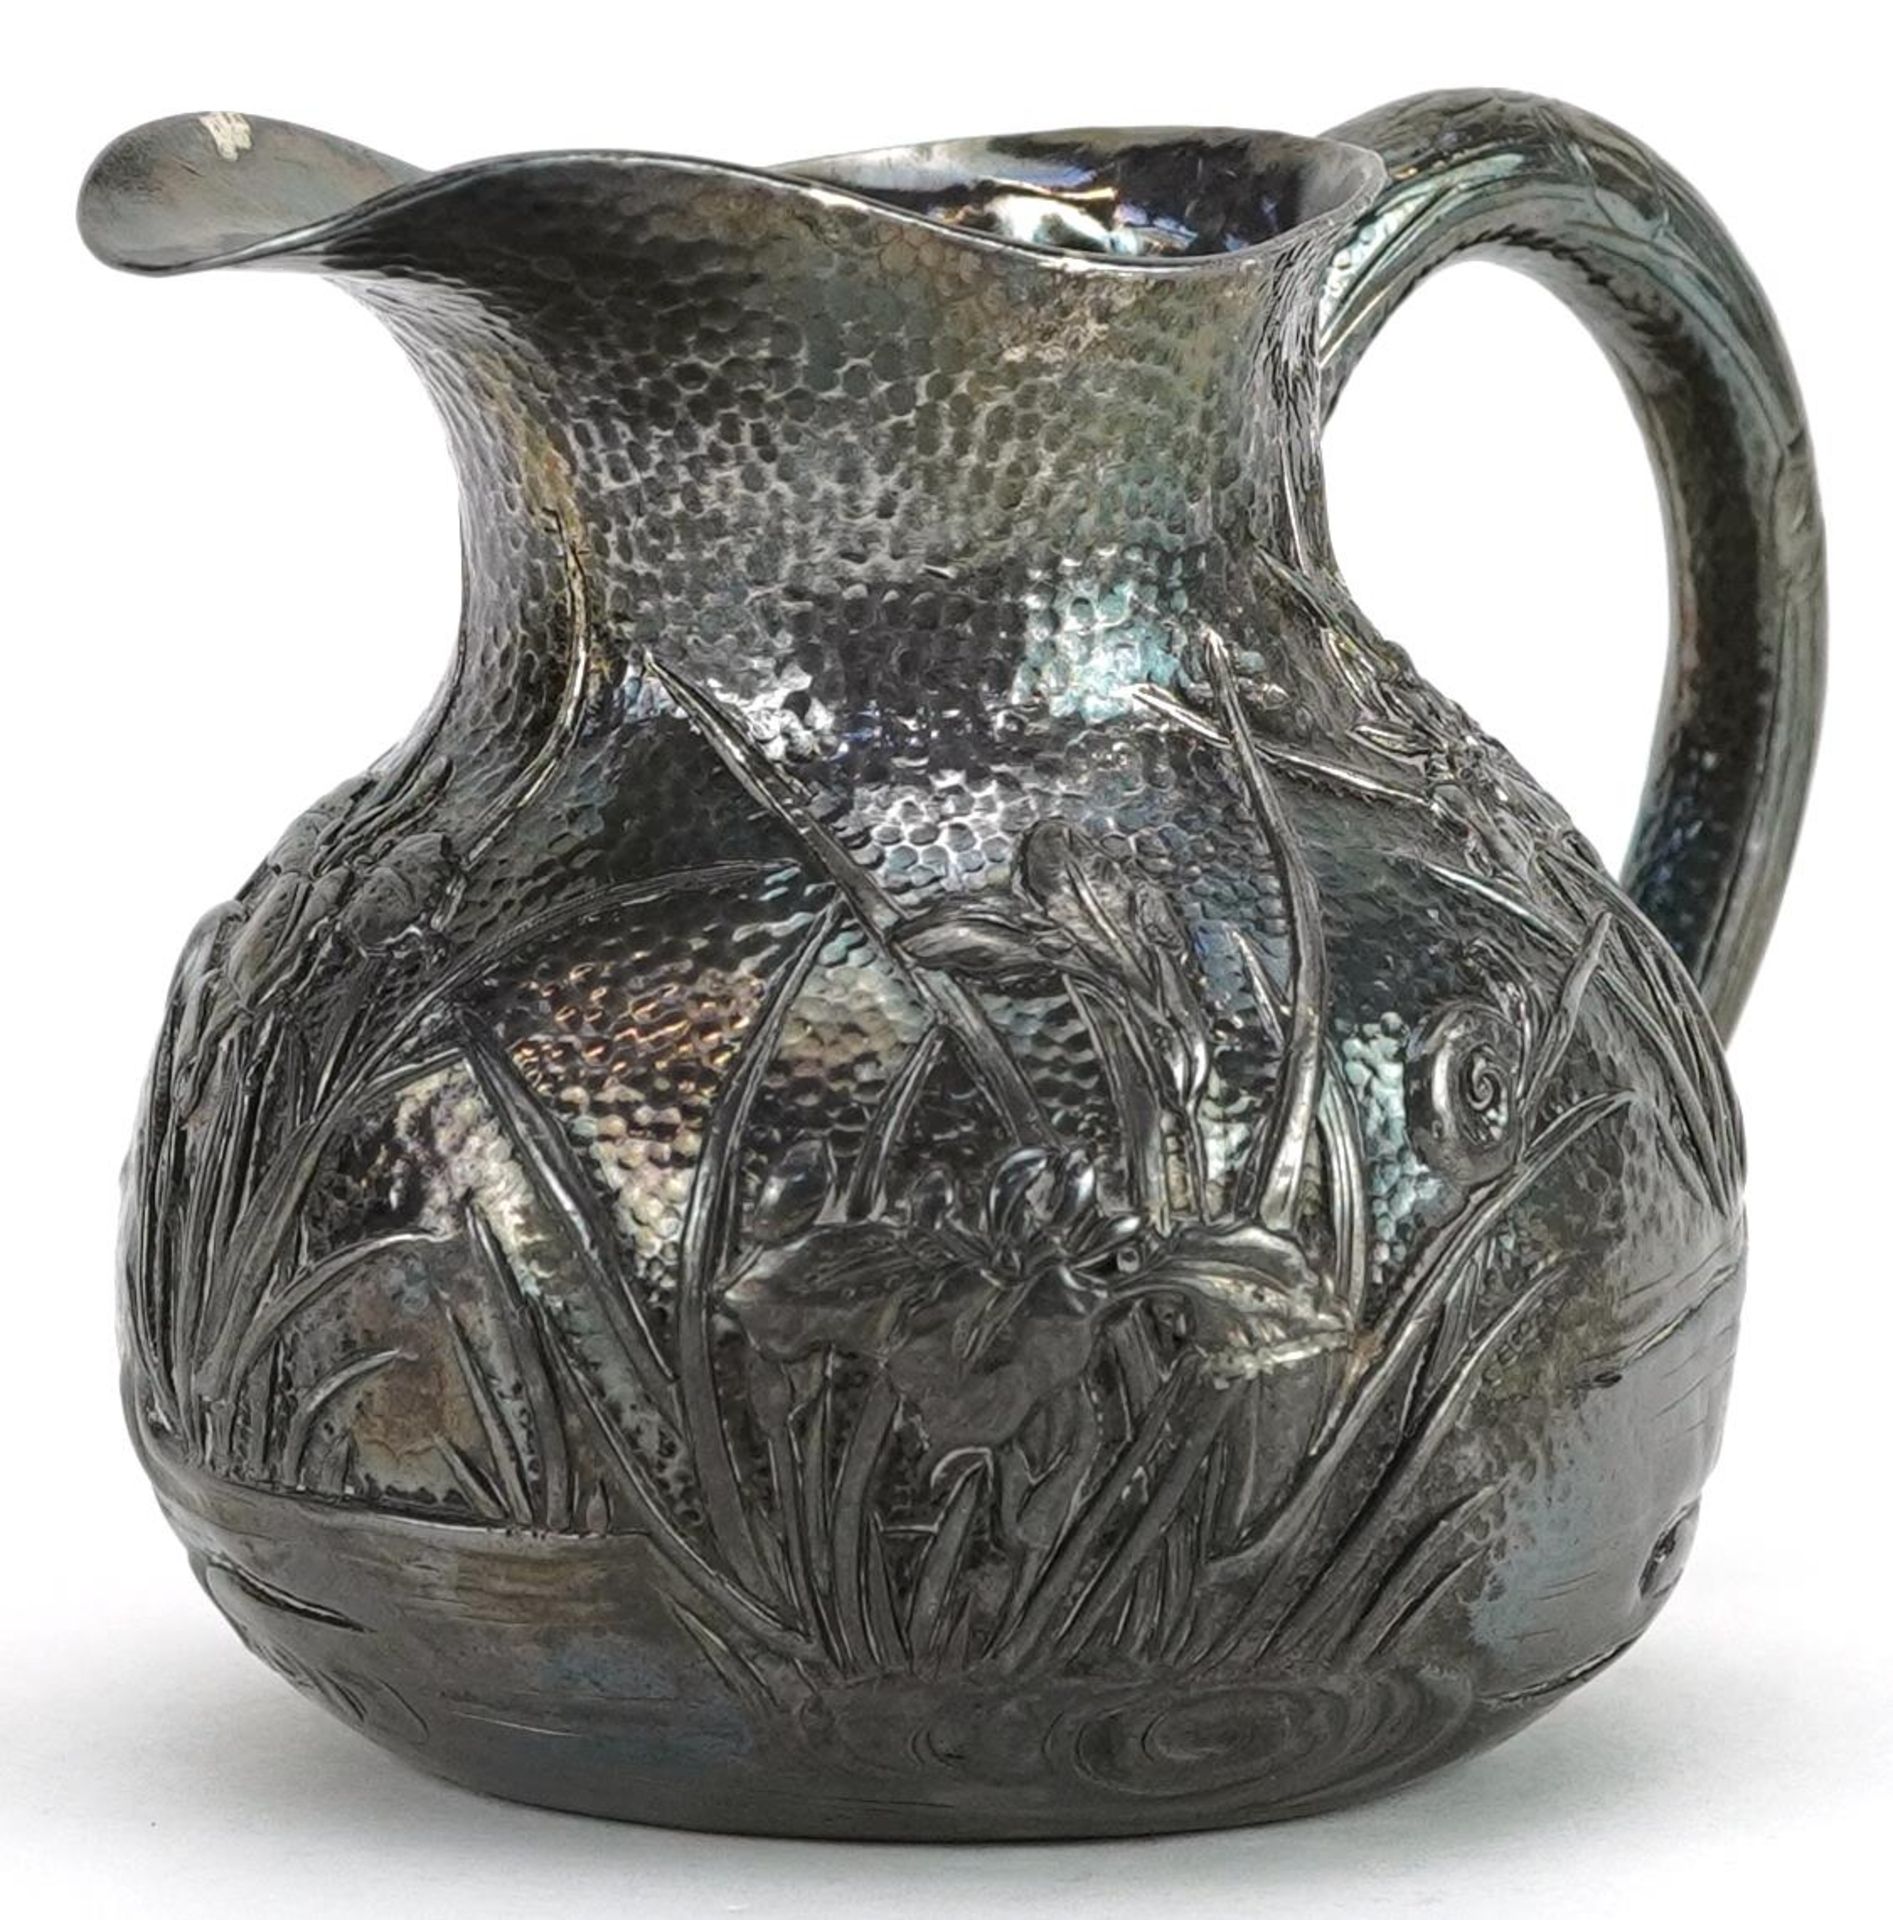 Japanese silver cream jug embossed with insects amongst flowers and reeds, impressed character marks